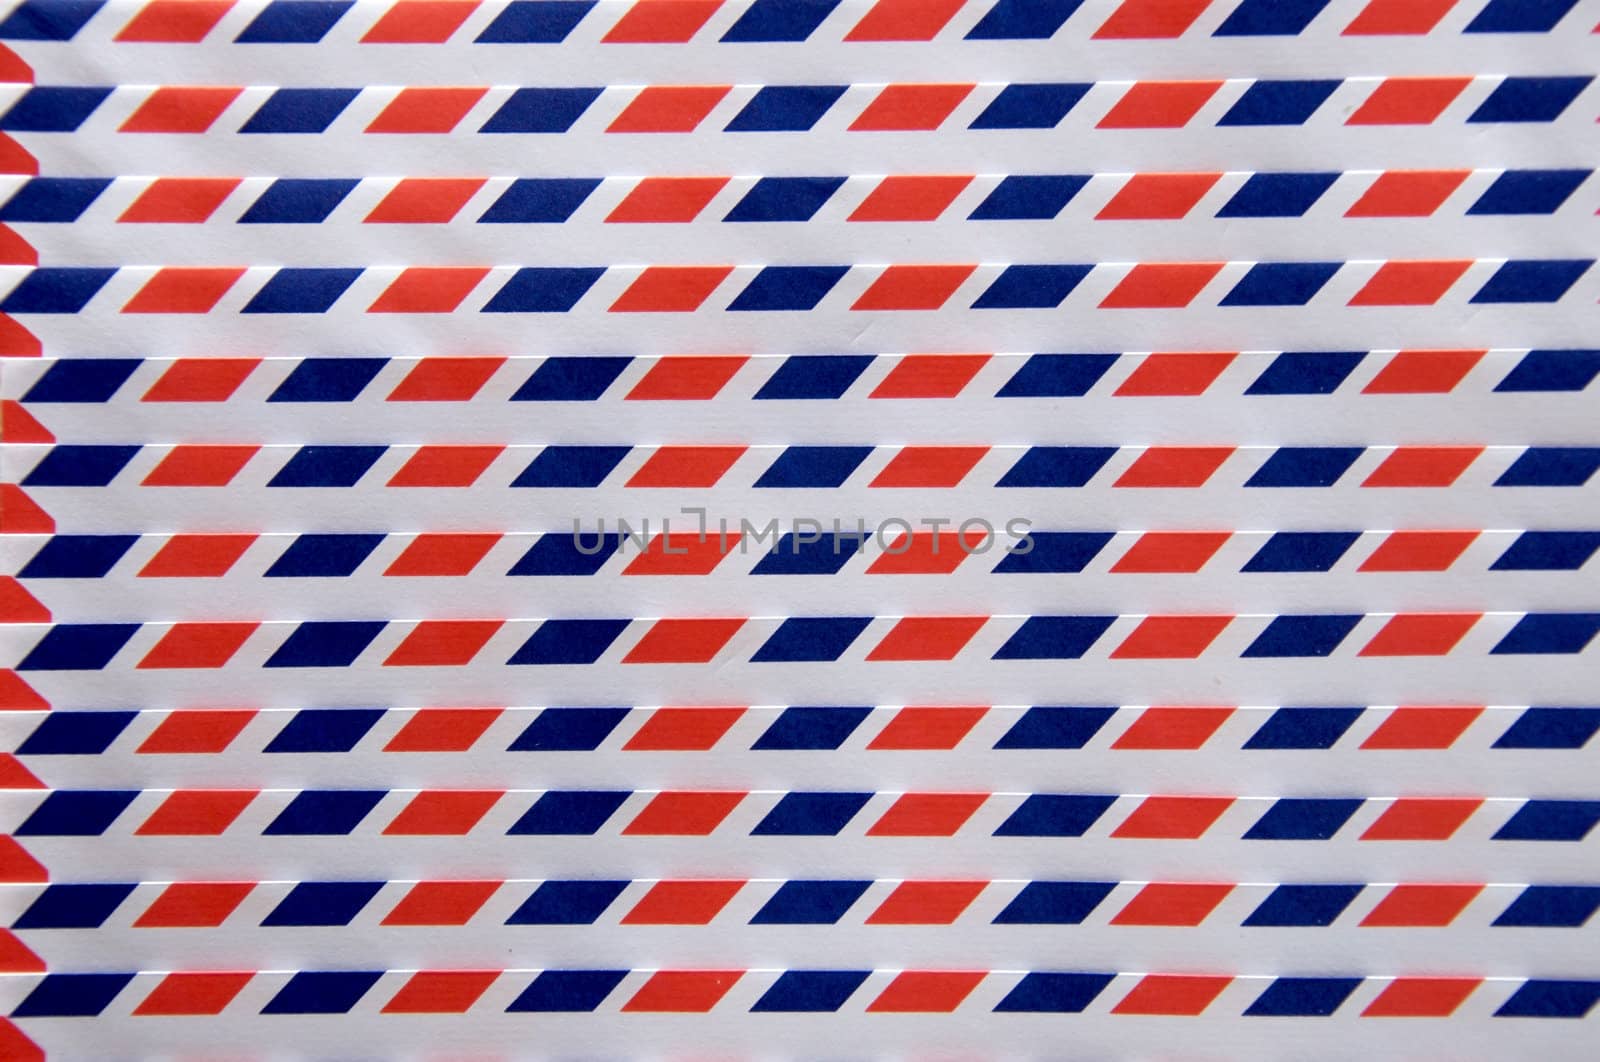 Paper background. Red blue white color.